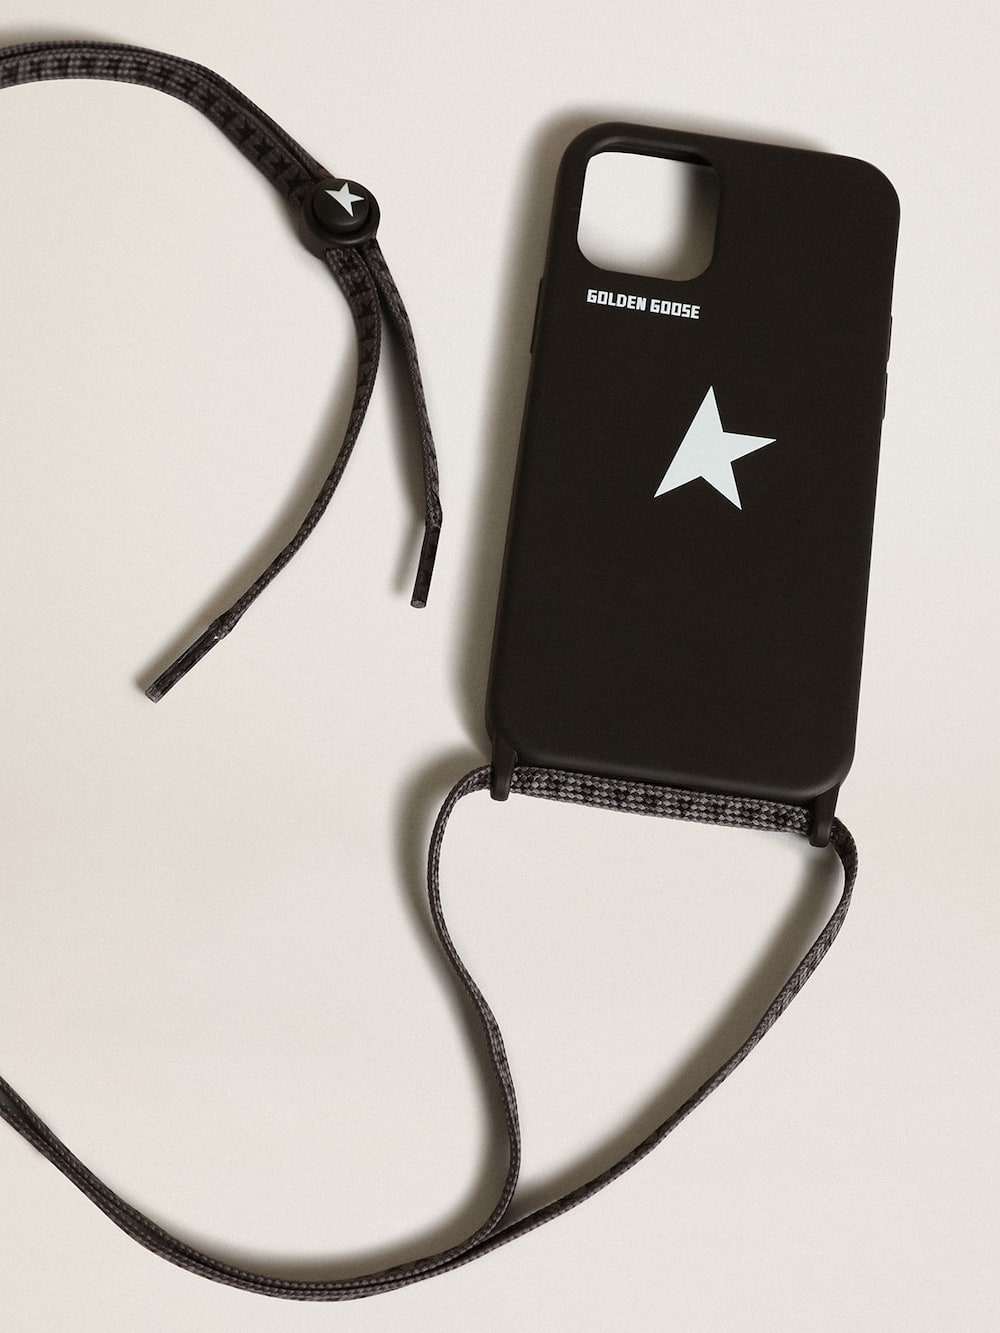 Golden Goose - Cover for iPhone 12 and 12 Pro Max black with white logo in 